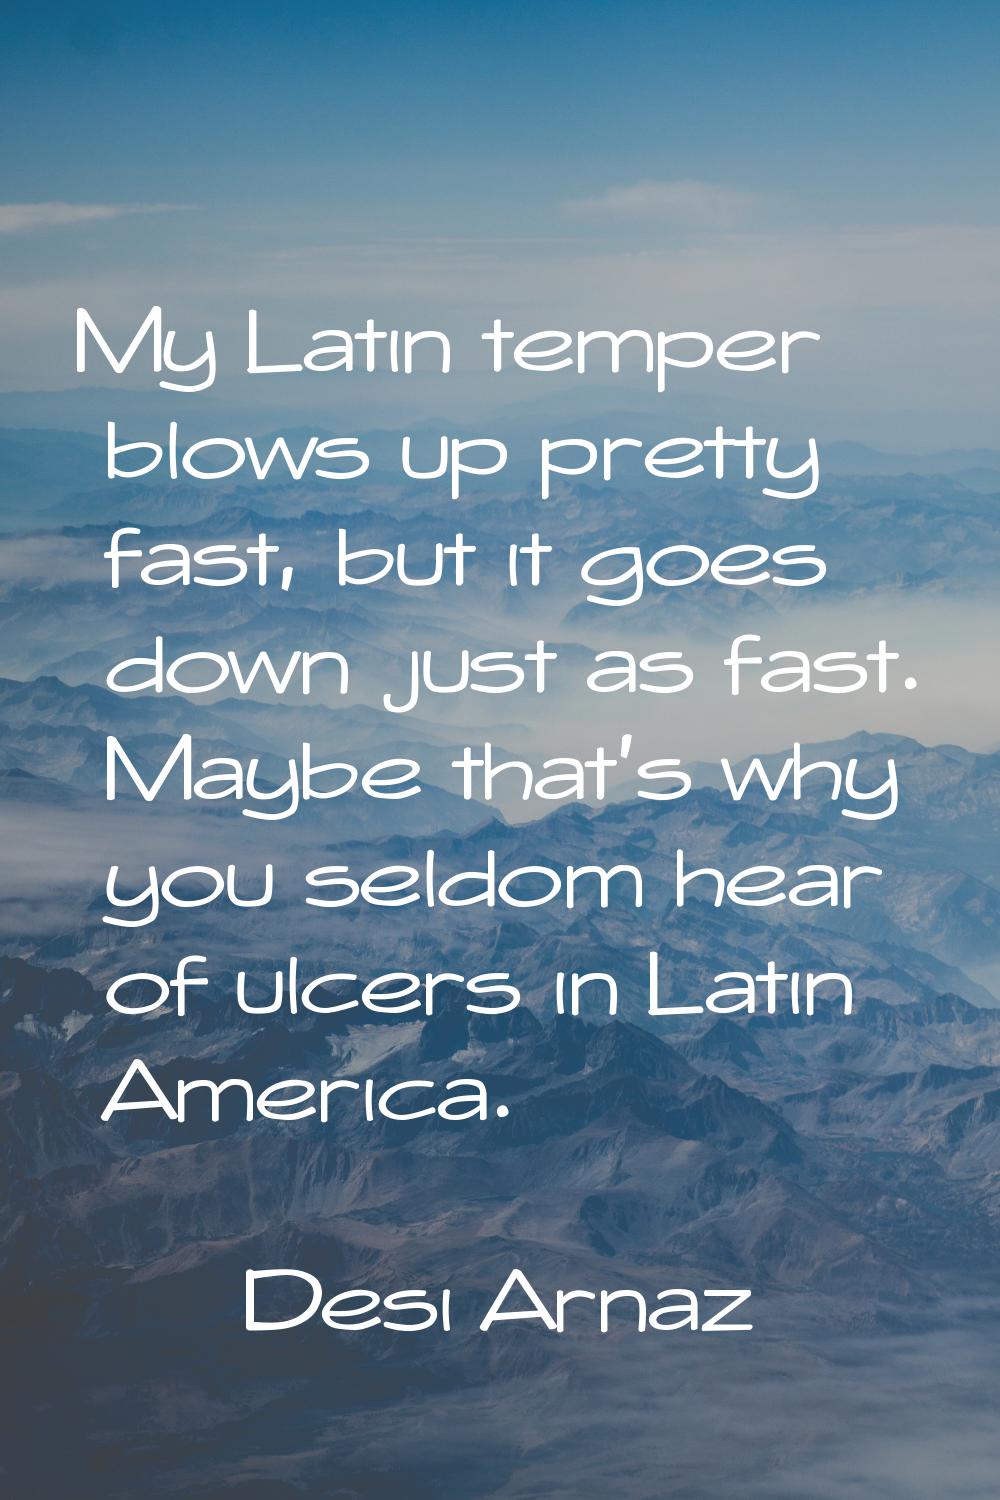 My Latin temper blows up pretty fast, but it goes down just as fast. Maybe that's why you seldom he